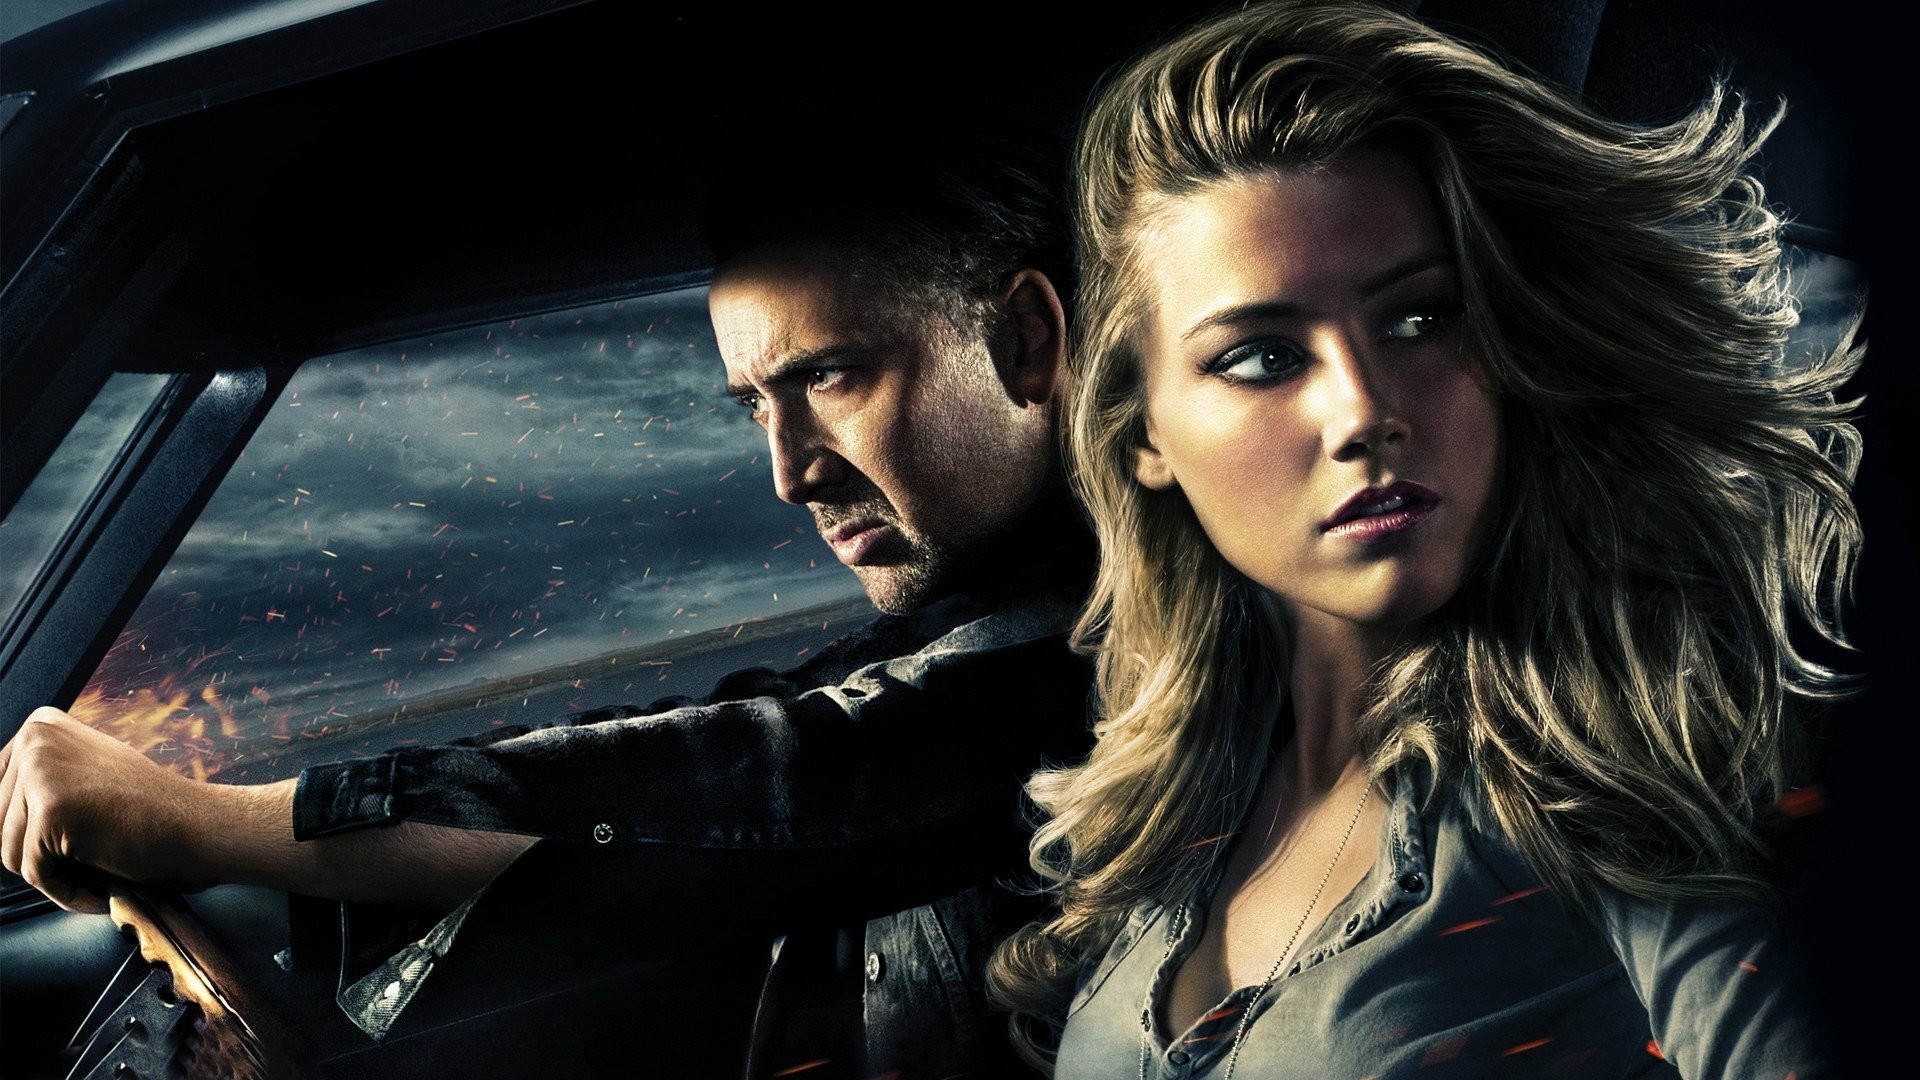 drive angry movie free download